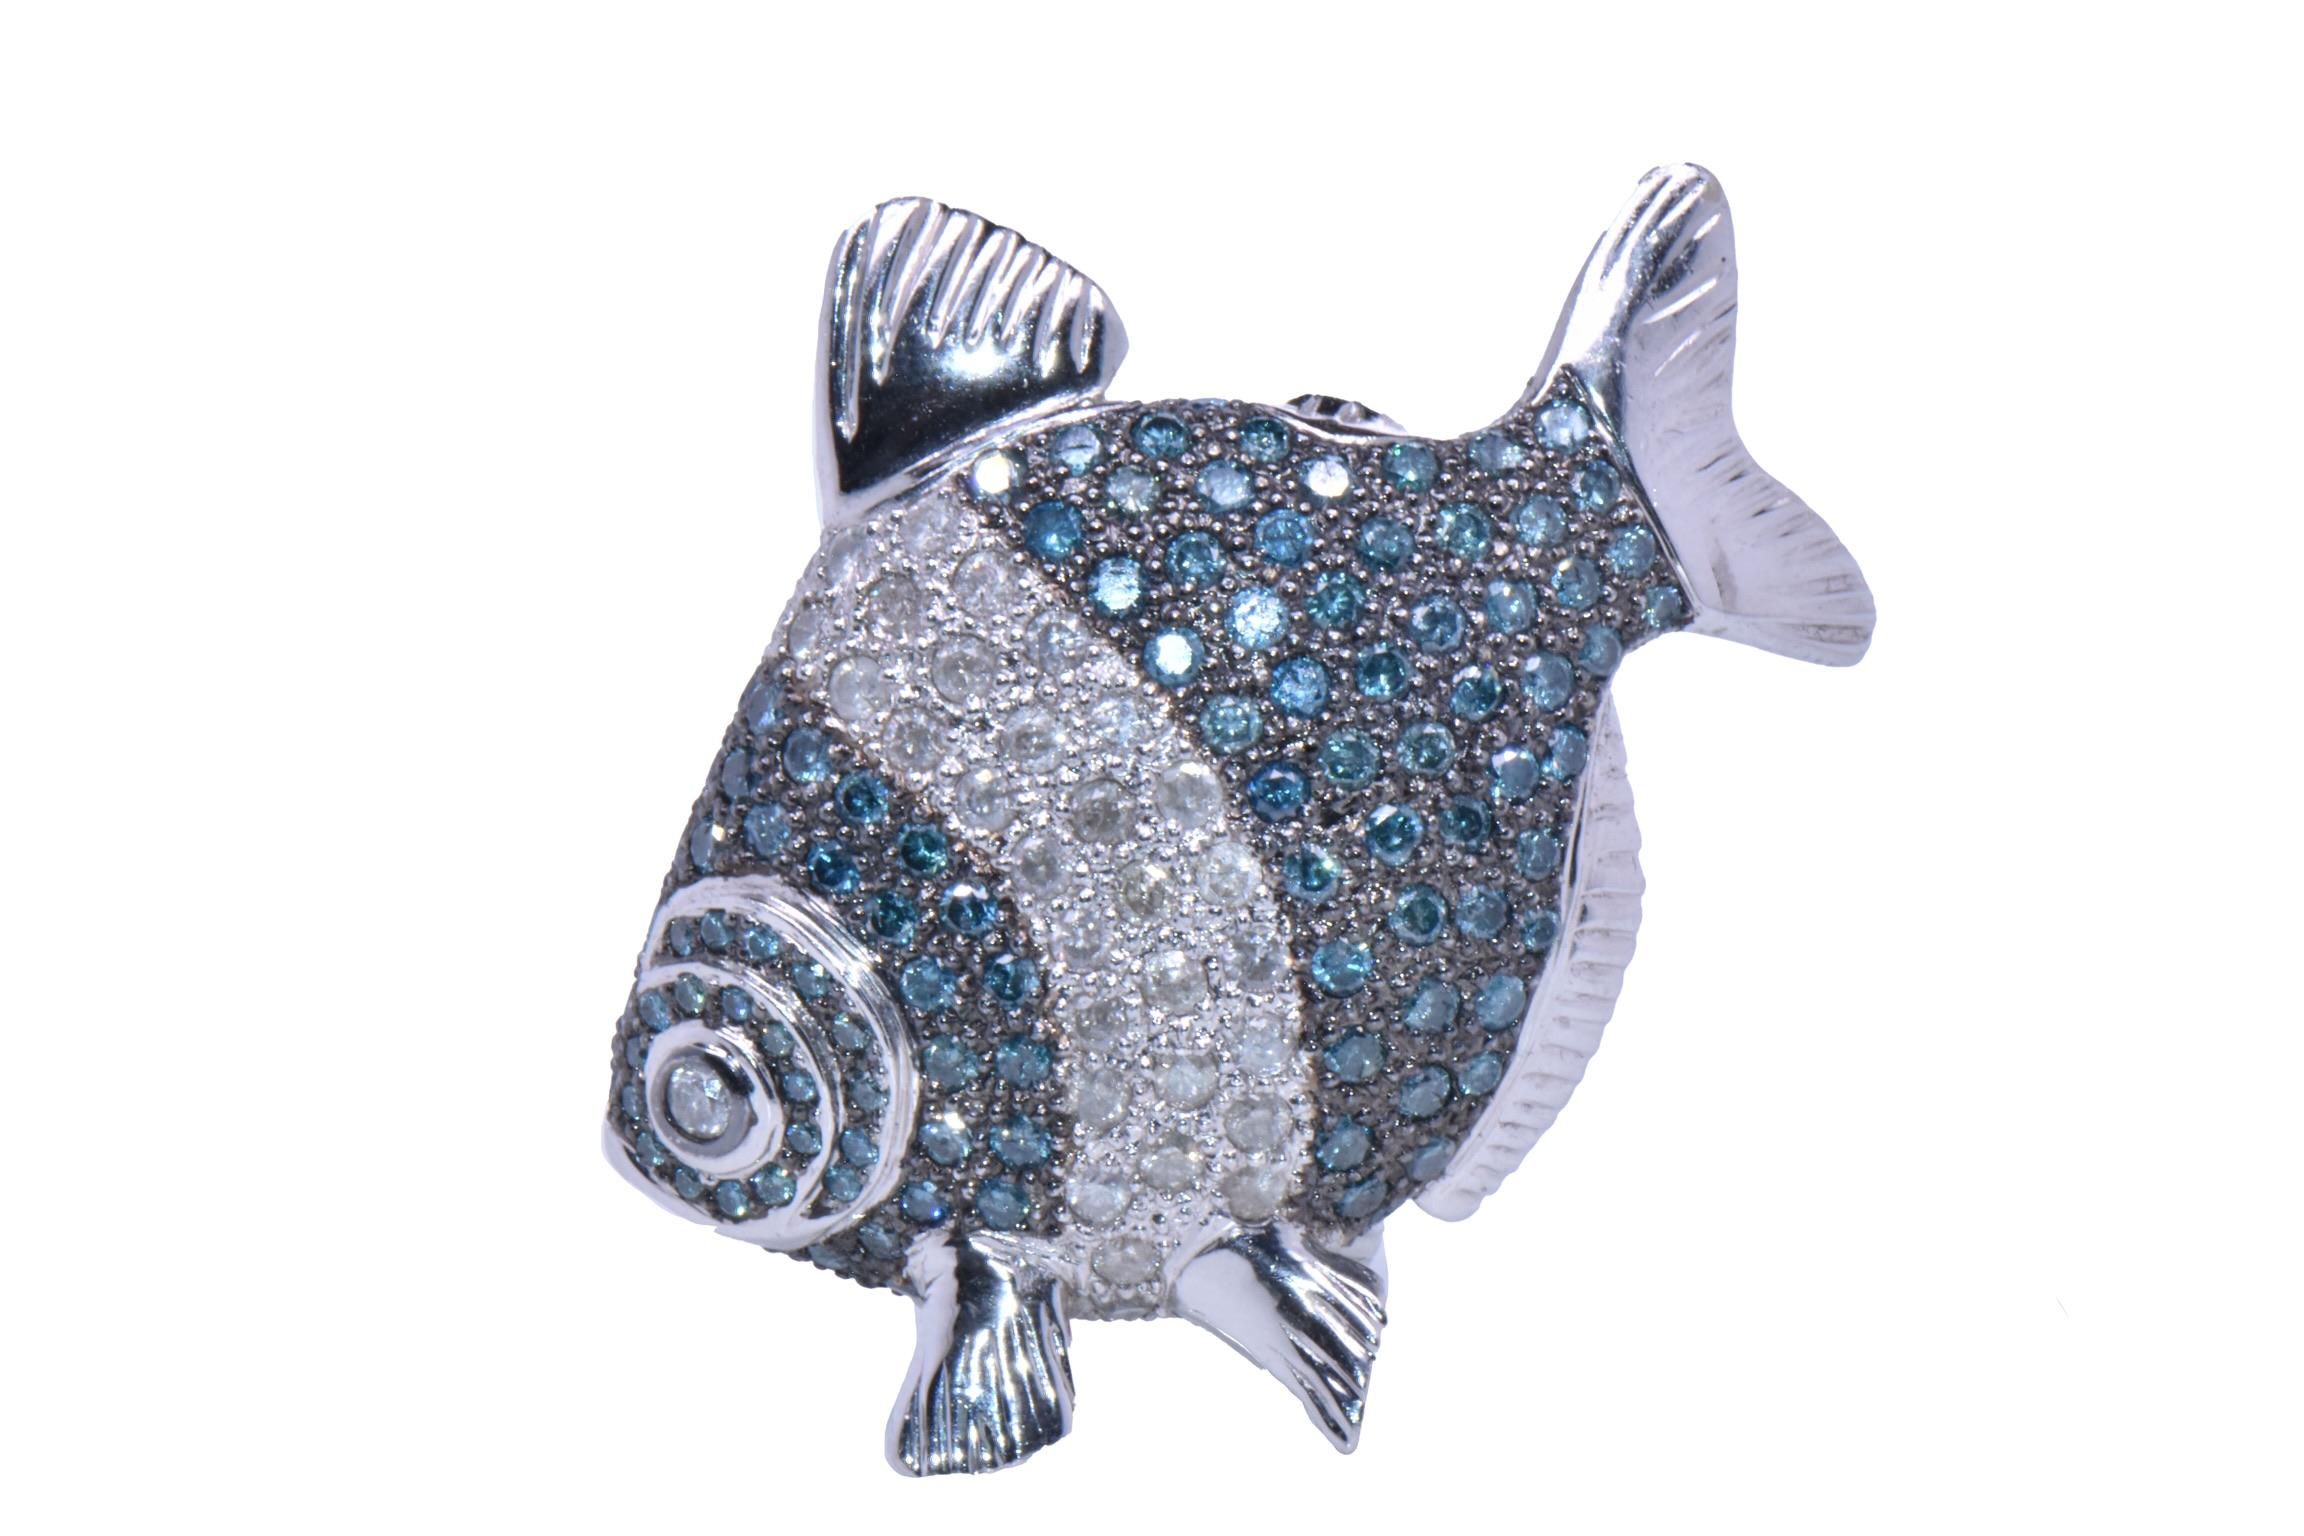 A One of One 18k White Gold Fish Figurine with White and Blue Diamonds 
Characteristics:
Diamond Carat Weight: 9.20 Carats
Metal: 36.05 grams, 18k White Gold 